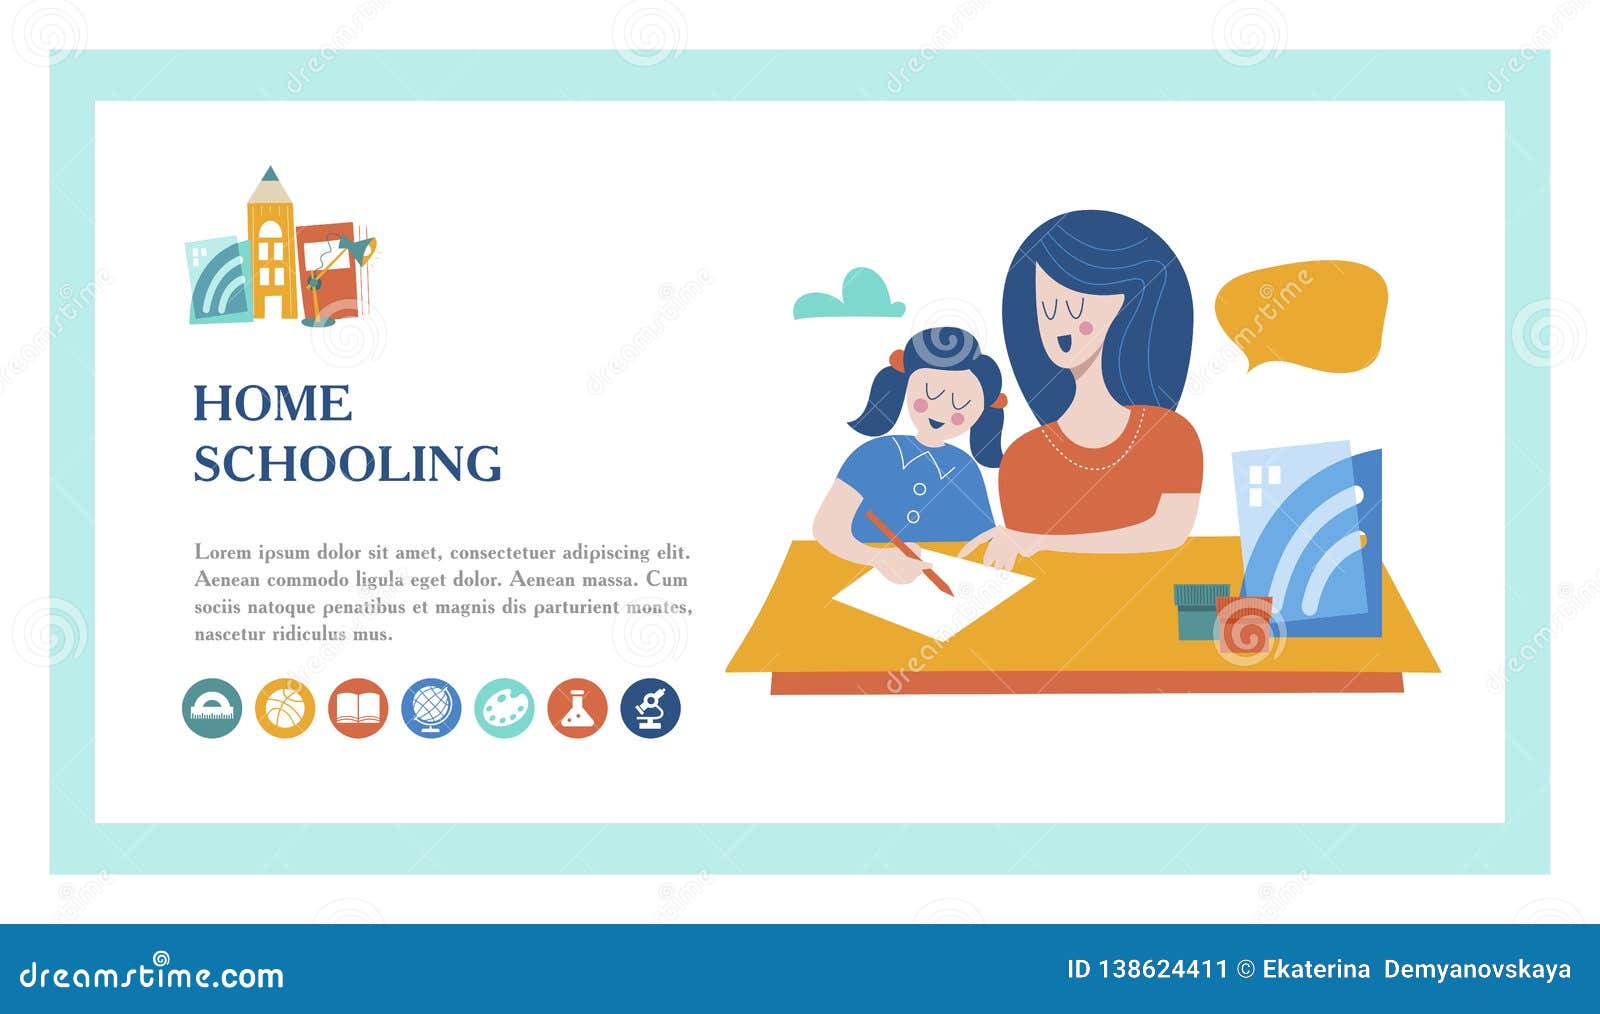 Download The Concept Of Homeschooling. Vector Illustration. The ...